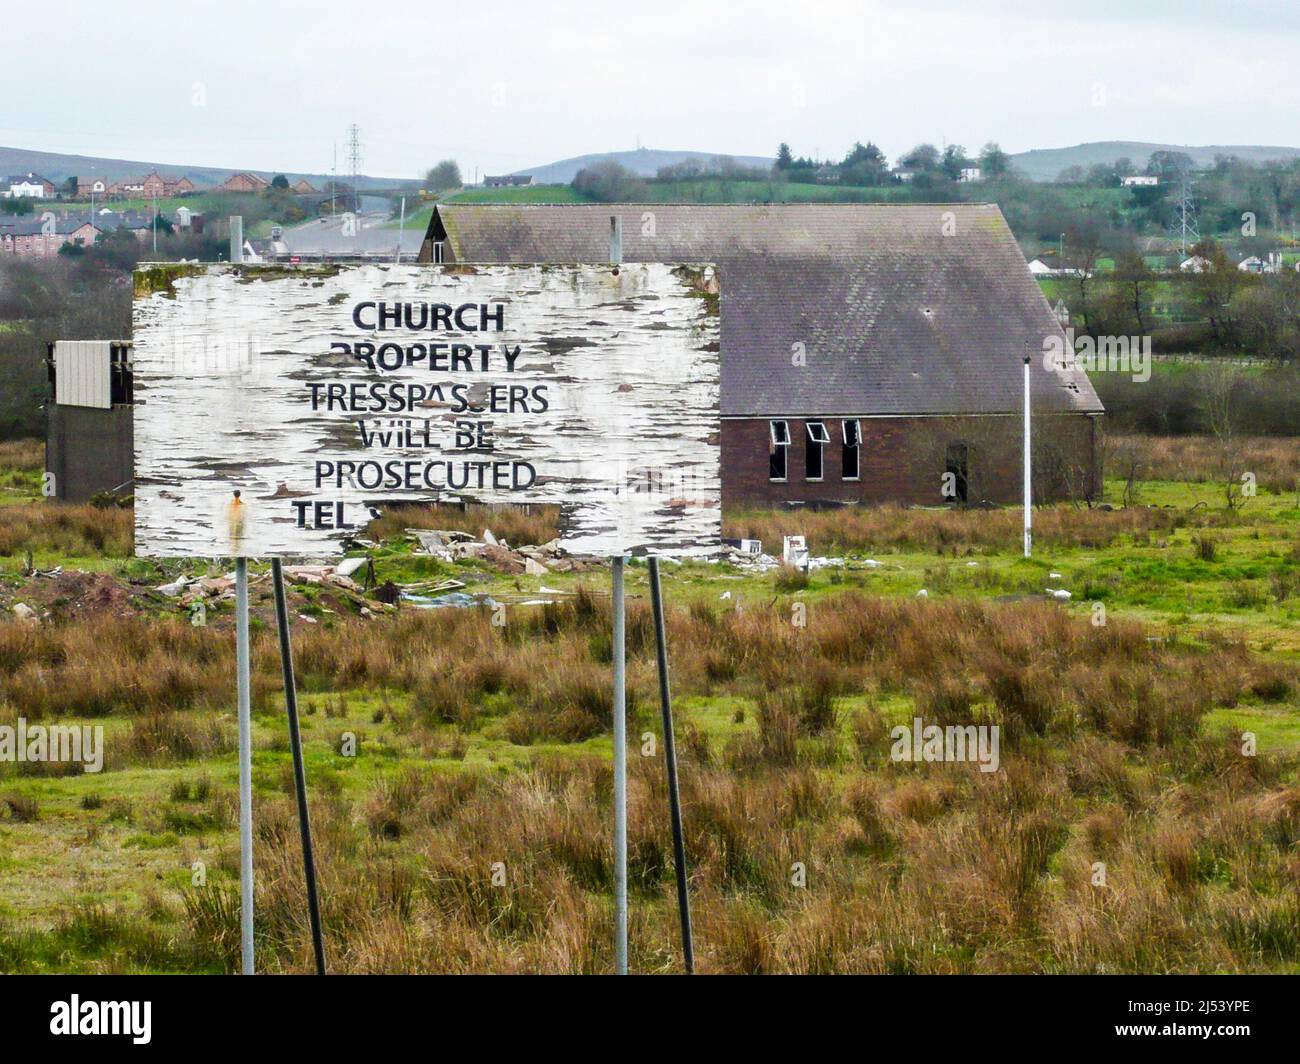 Sign outside a derelict church saying 'Church property.  Tresspassers (sic) will be prosecuted' Stock Photo